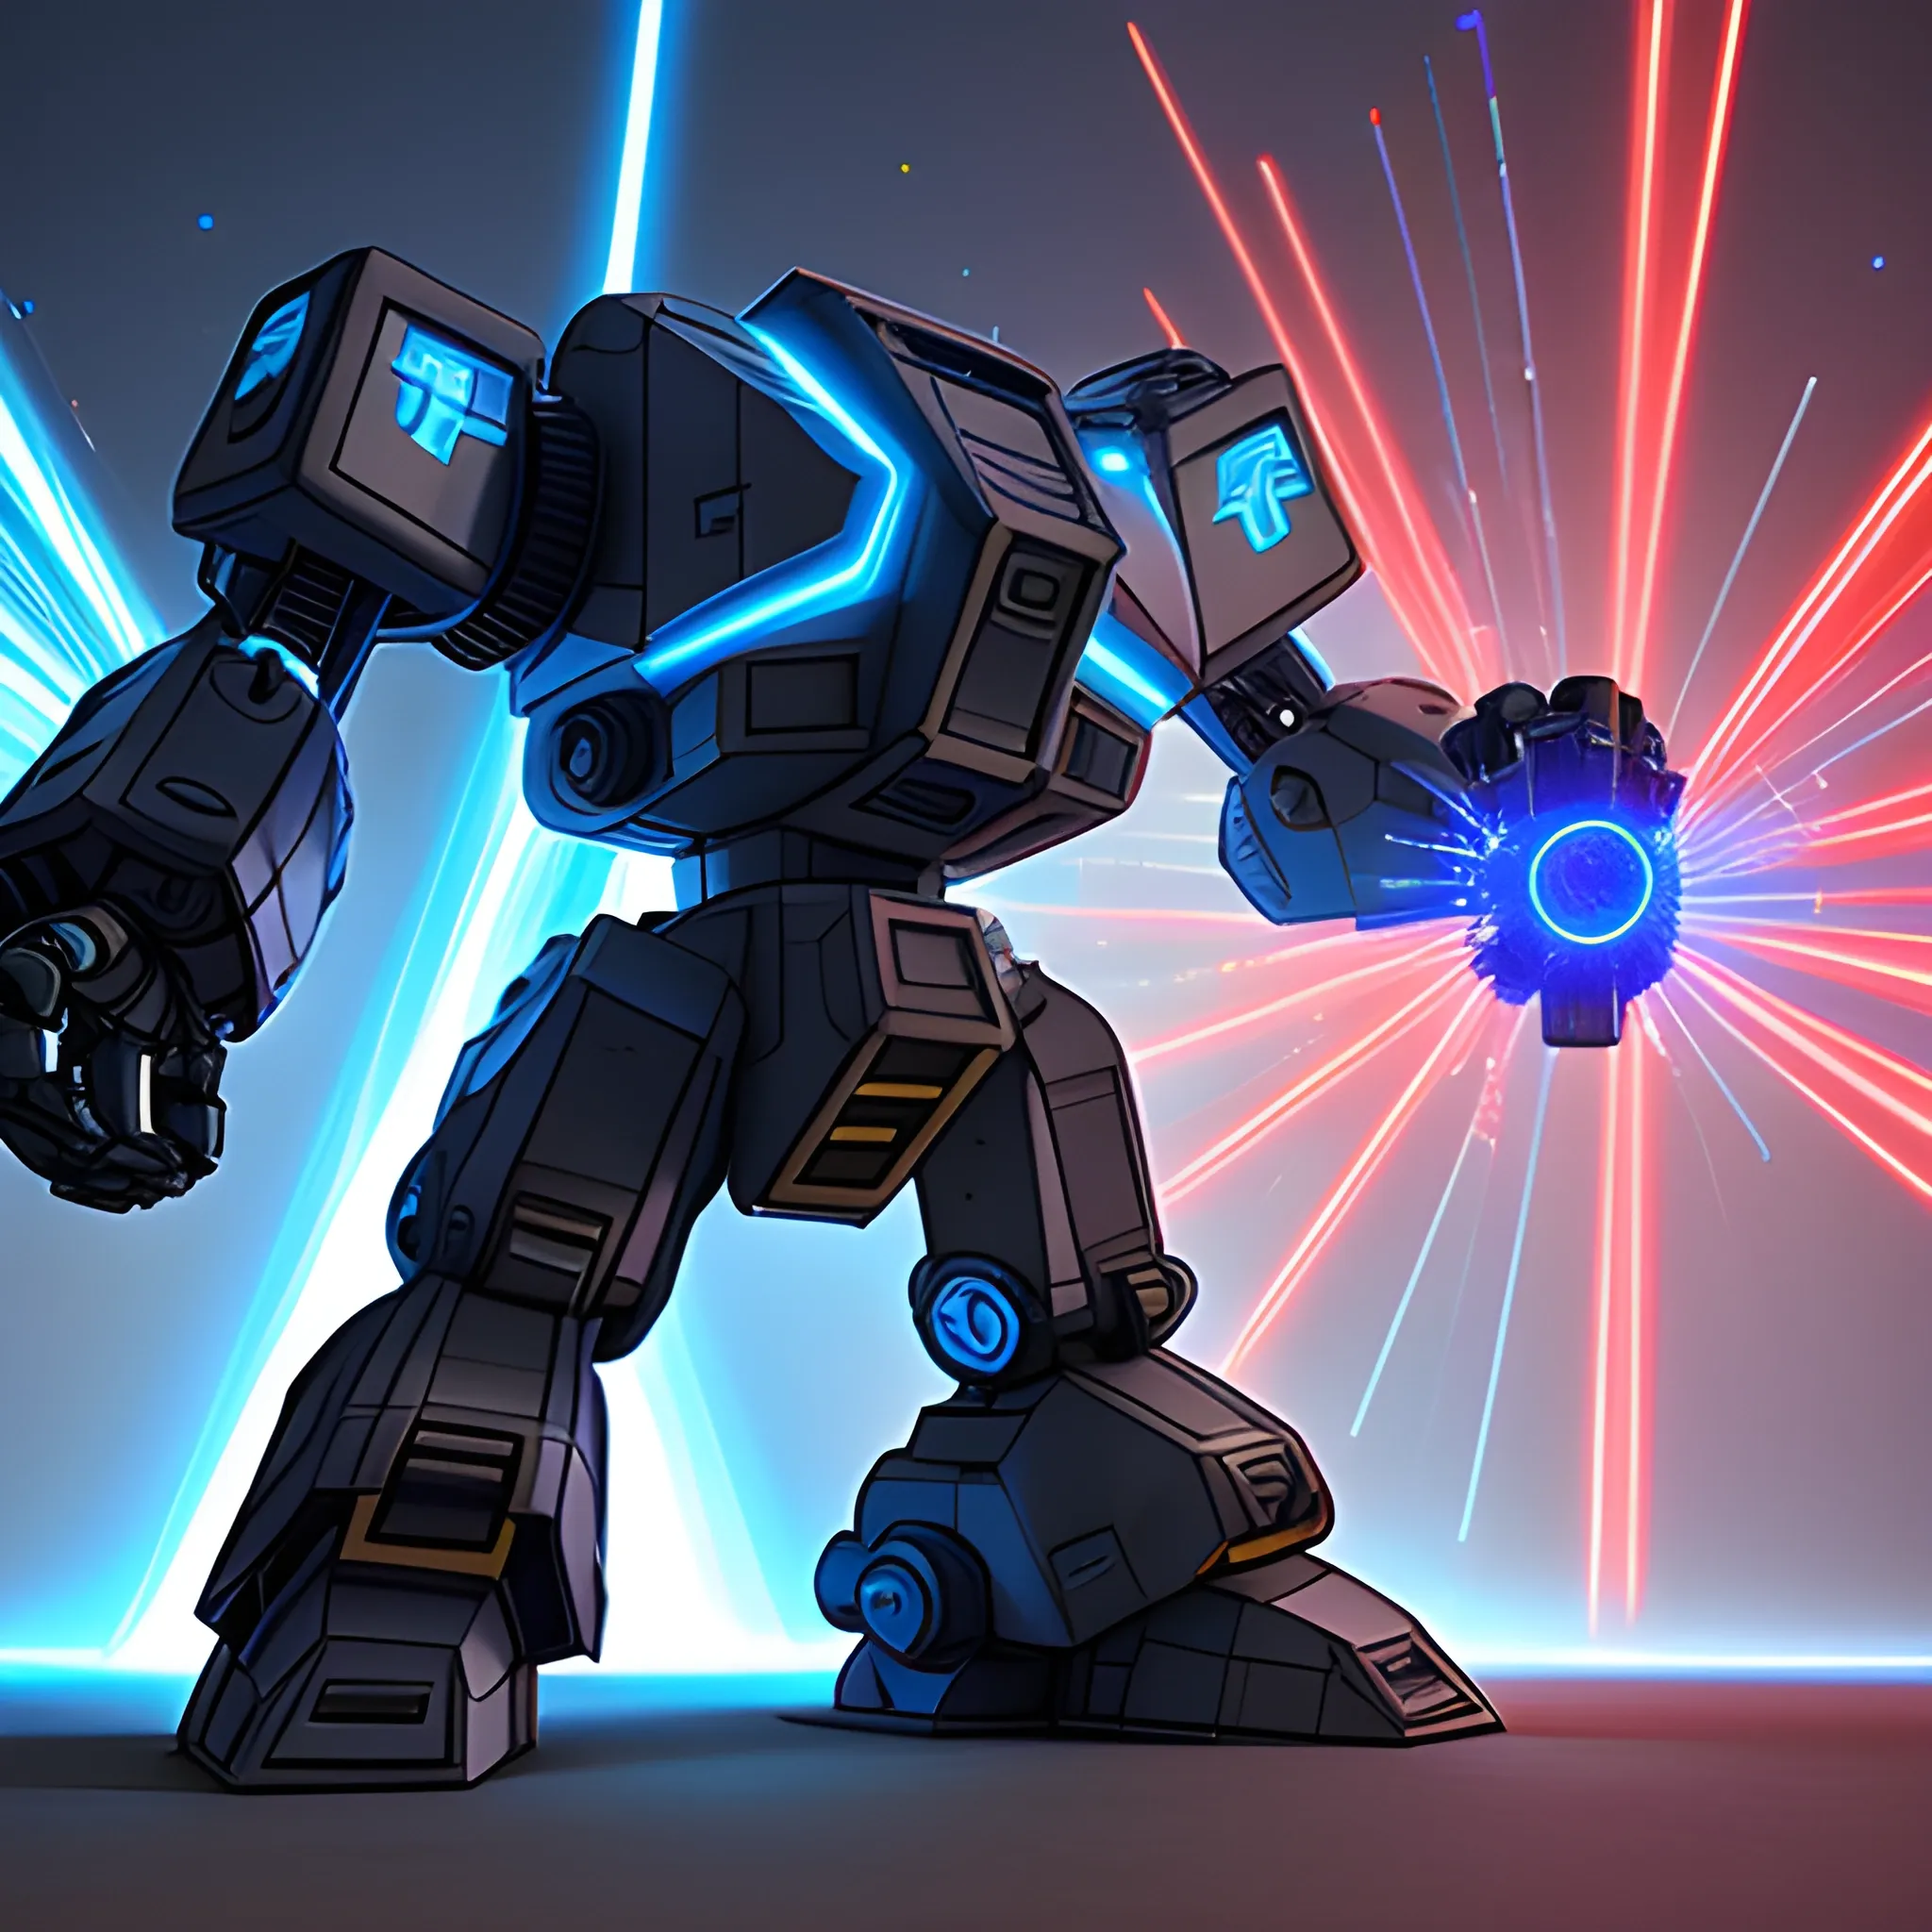 giant mech with laser blaster, blue core in the middle, 3D